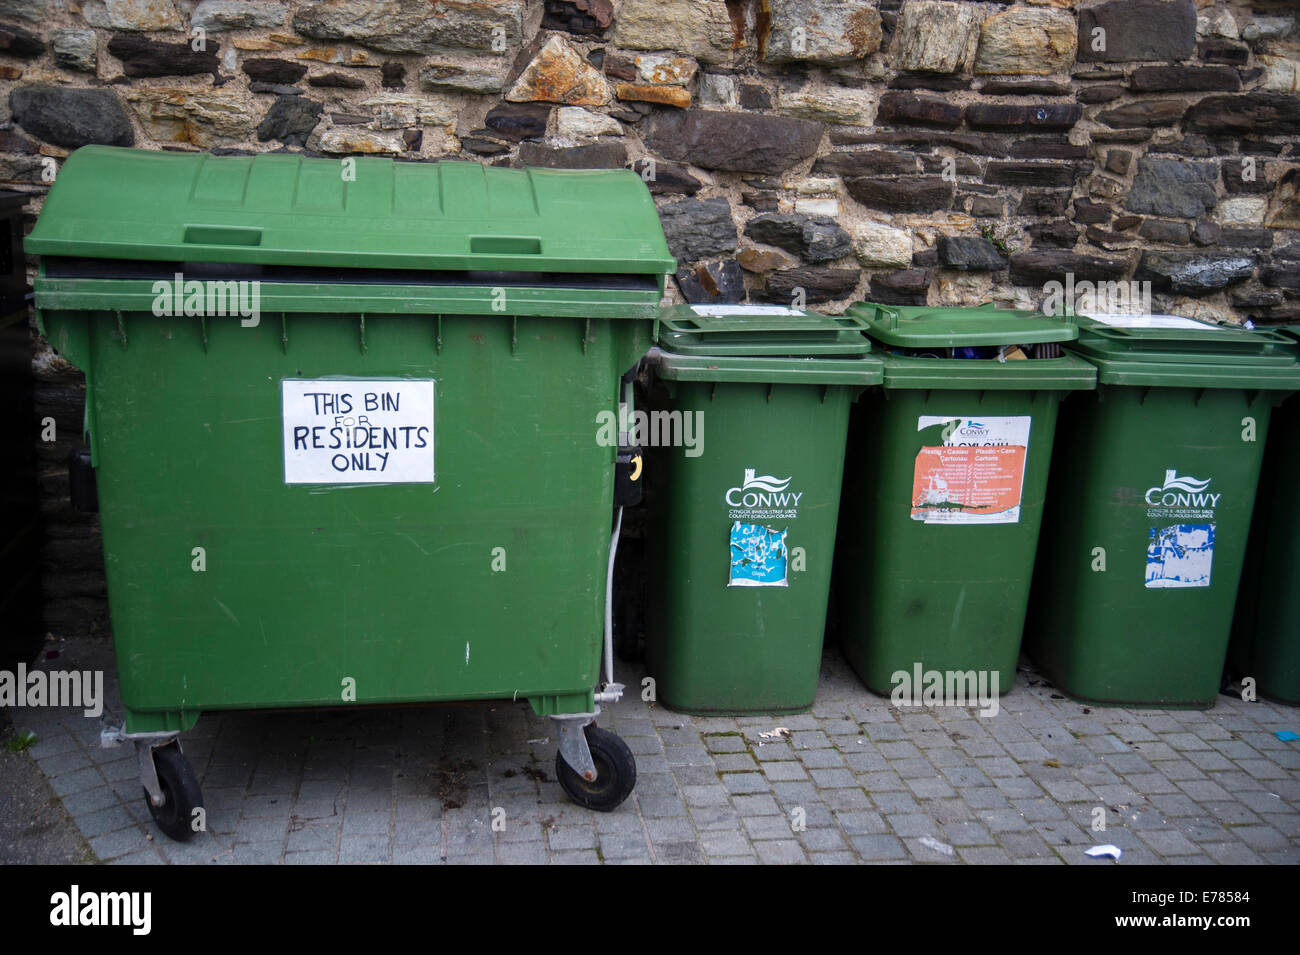 A row of refuse bins in Conwy, North Wales. With sign 'This bin for  residents only' Stock Photo - Alamy